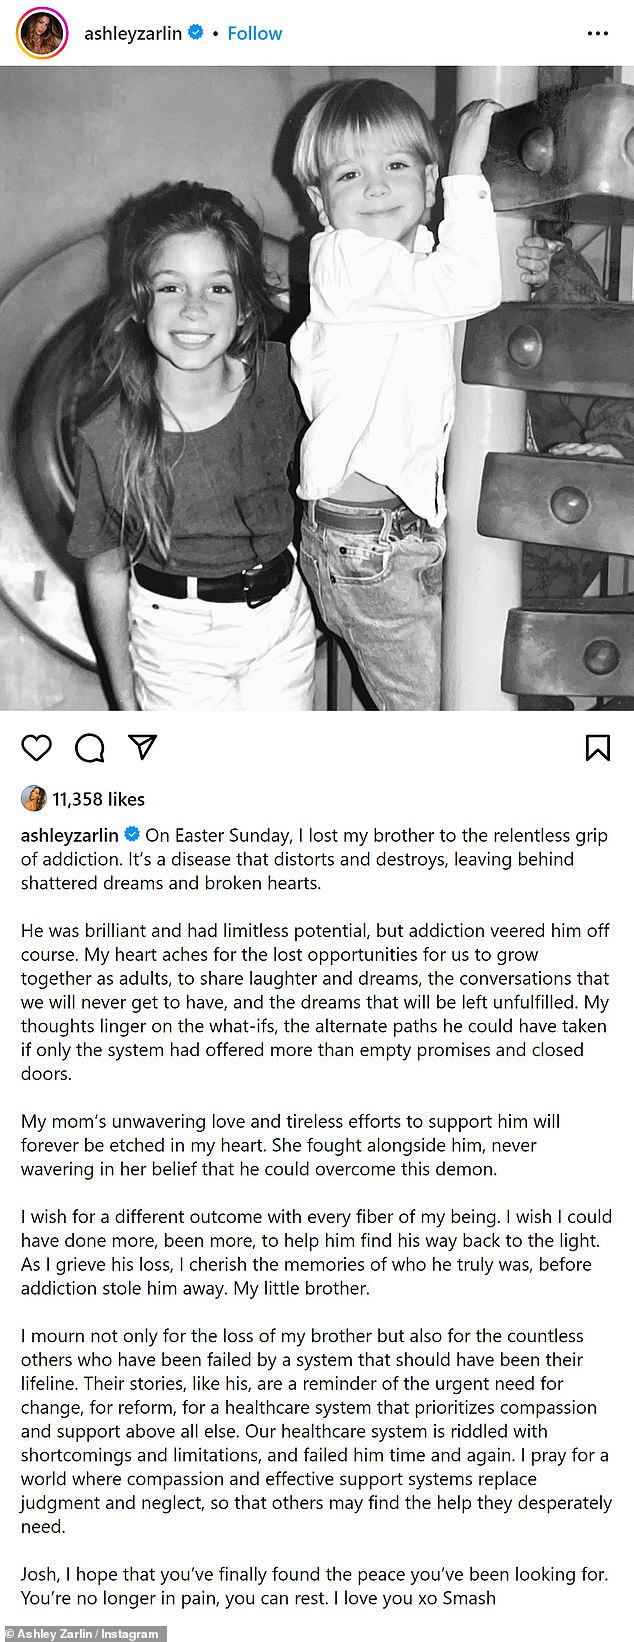 Ashley began her caption on social media: 'On Easter Sunday, I lost my brother to the relentless clutches of addiction. Is it a disease that distorts and destroys, leaving behind shattered dreams and broken hearts?